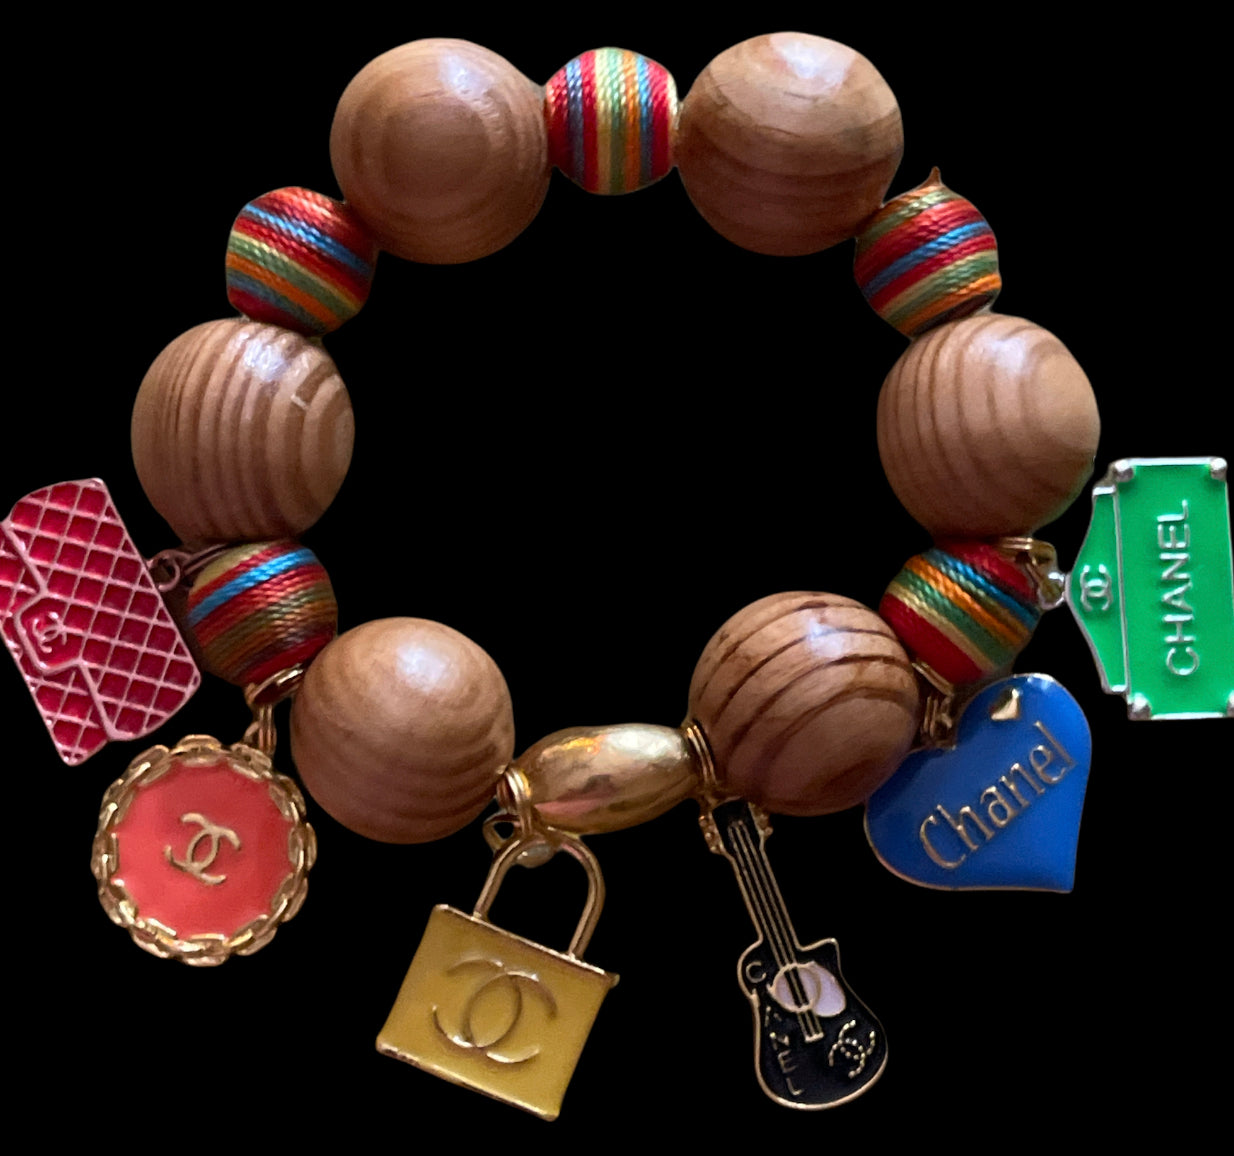 MARLEY: Medium Brown Wooden Beads with Chanel-Inspired Charms & Rainbow Beaded Bracelet – Elevate Your Style! - A chic and stylish bracelet with medium brown wooden beads, Chanel-inspired charms, and vibrant rainbow beads."